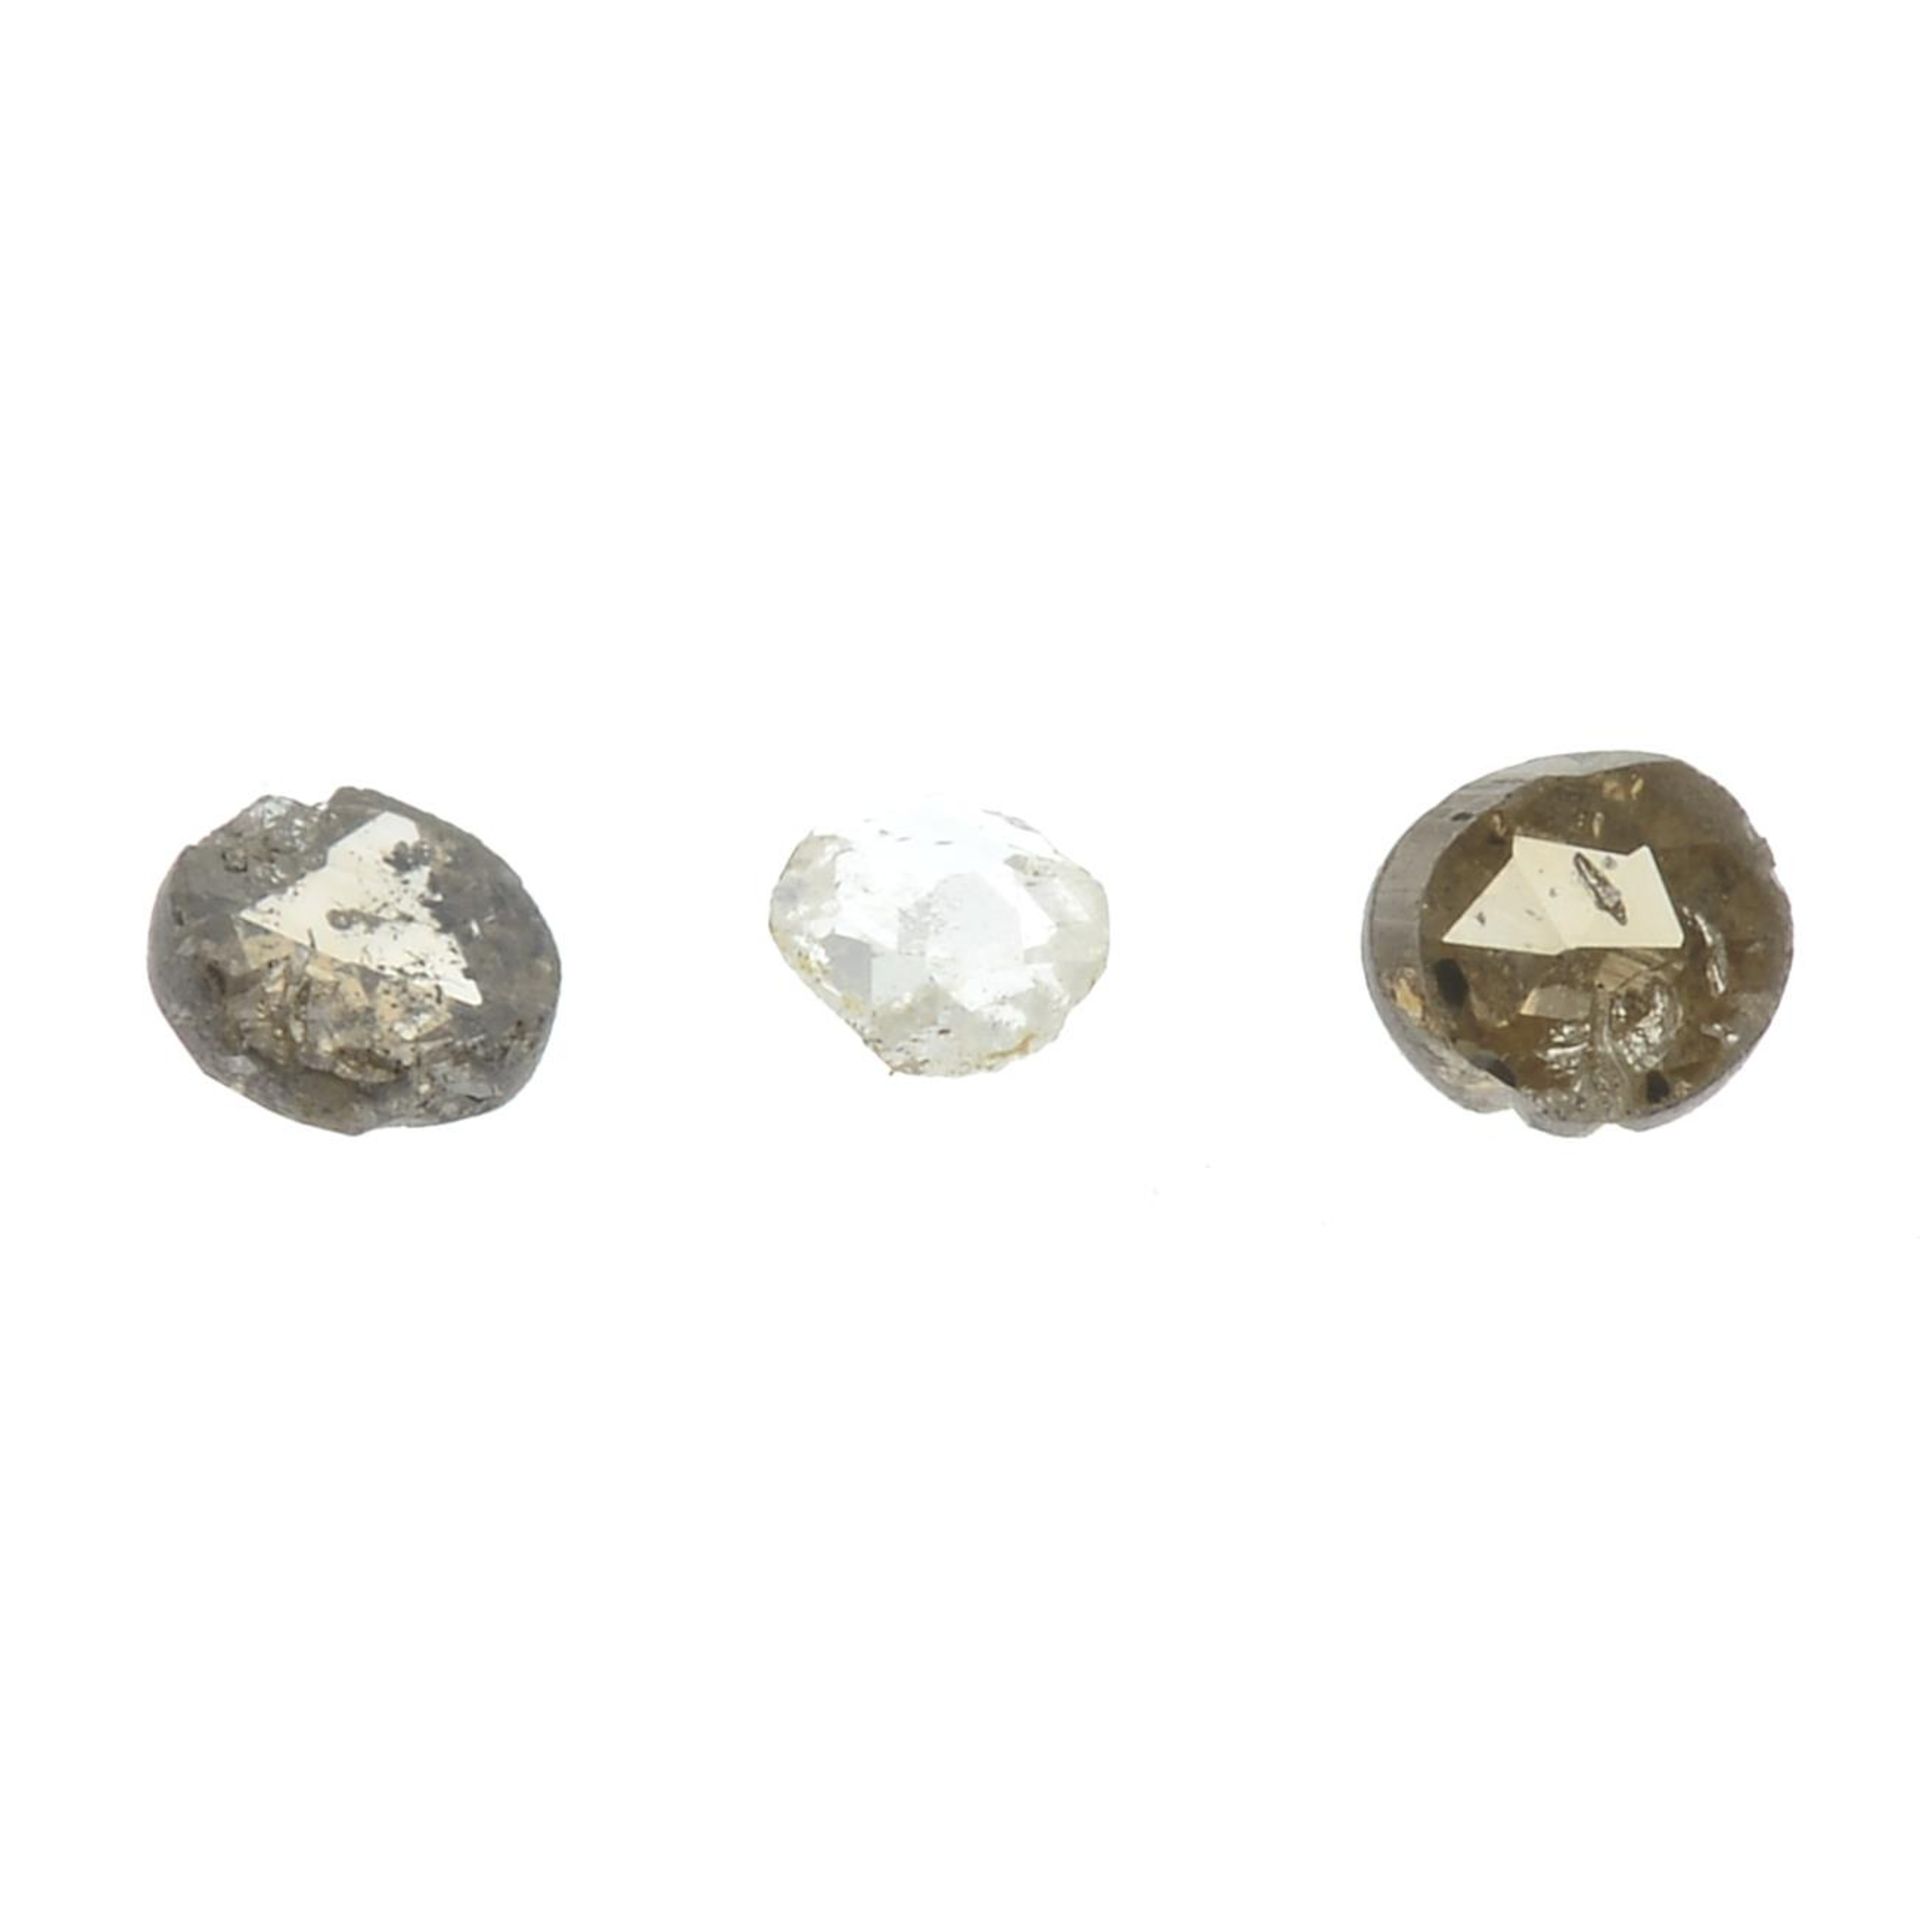 A small selection of rose-cut diamonds.